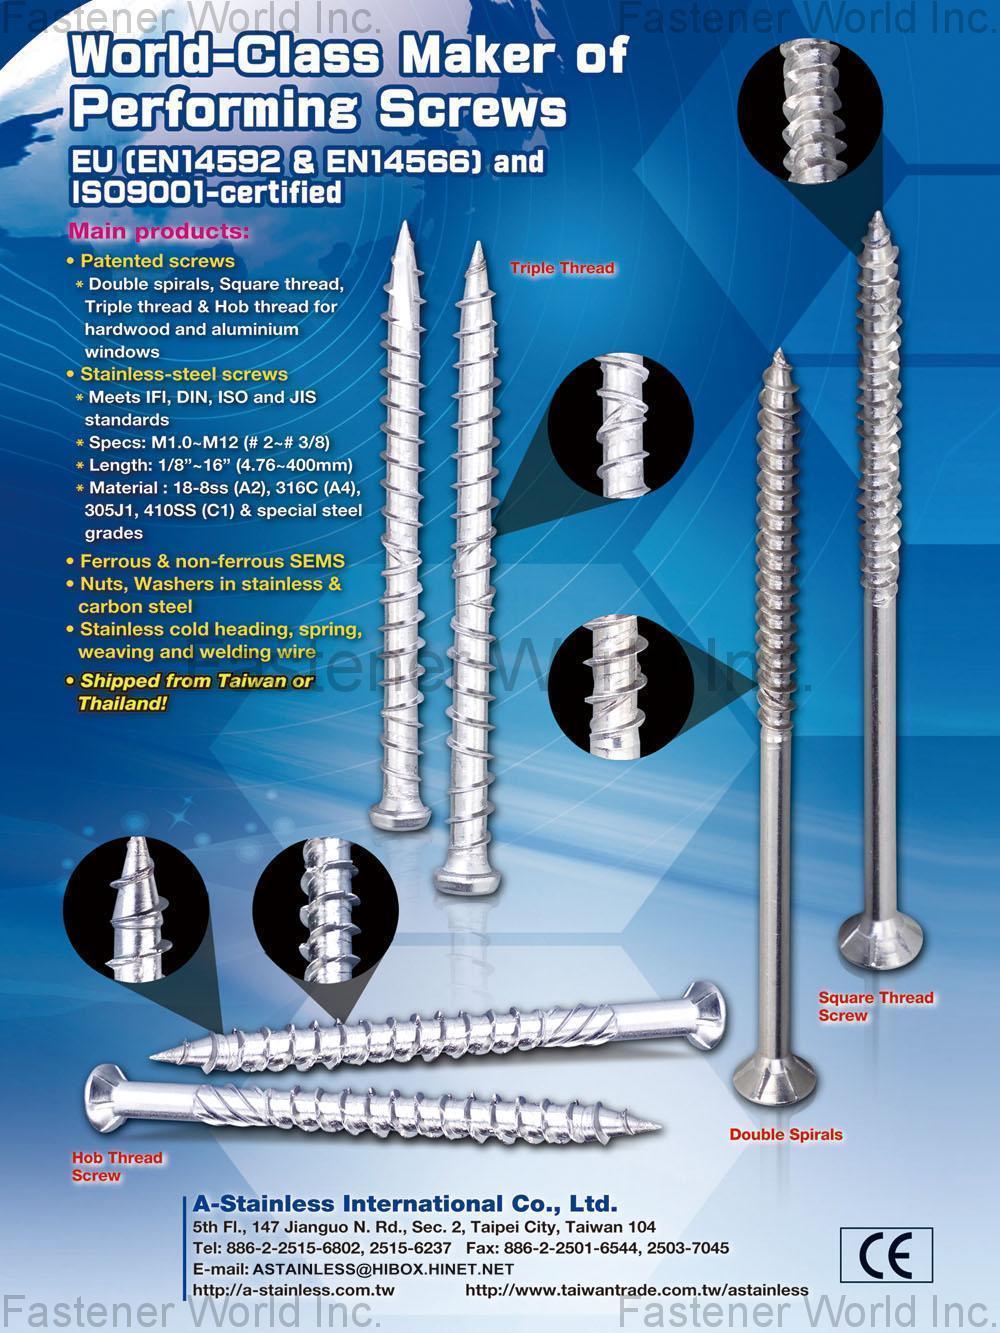 A-STAINLESS INTERNATIONAL CO., LTD. , Patented Screws, Stainless-steel Screws, Ferrous & non-ferrous SEMS, Nuts, Washers in stainless & Carbon Steel, Stainless Cold Heading, Spring, Weaving and Welding Wire , Stainless Steel